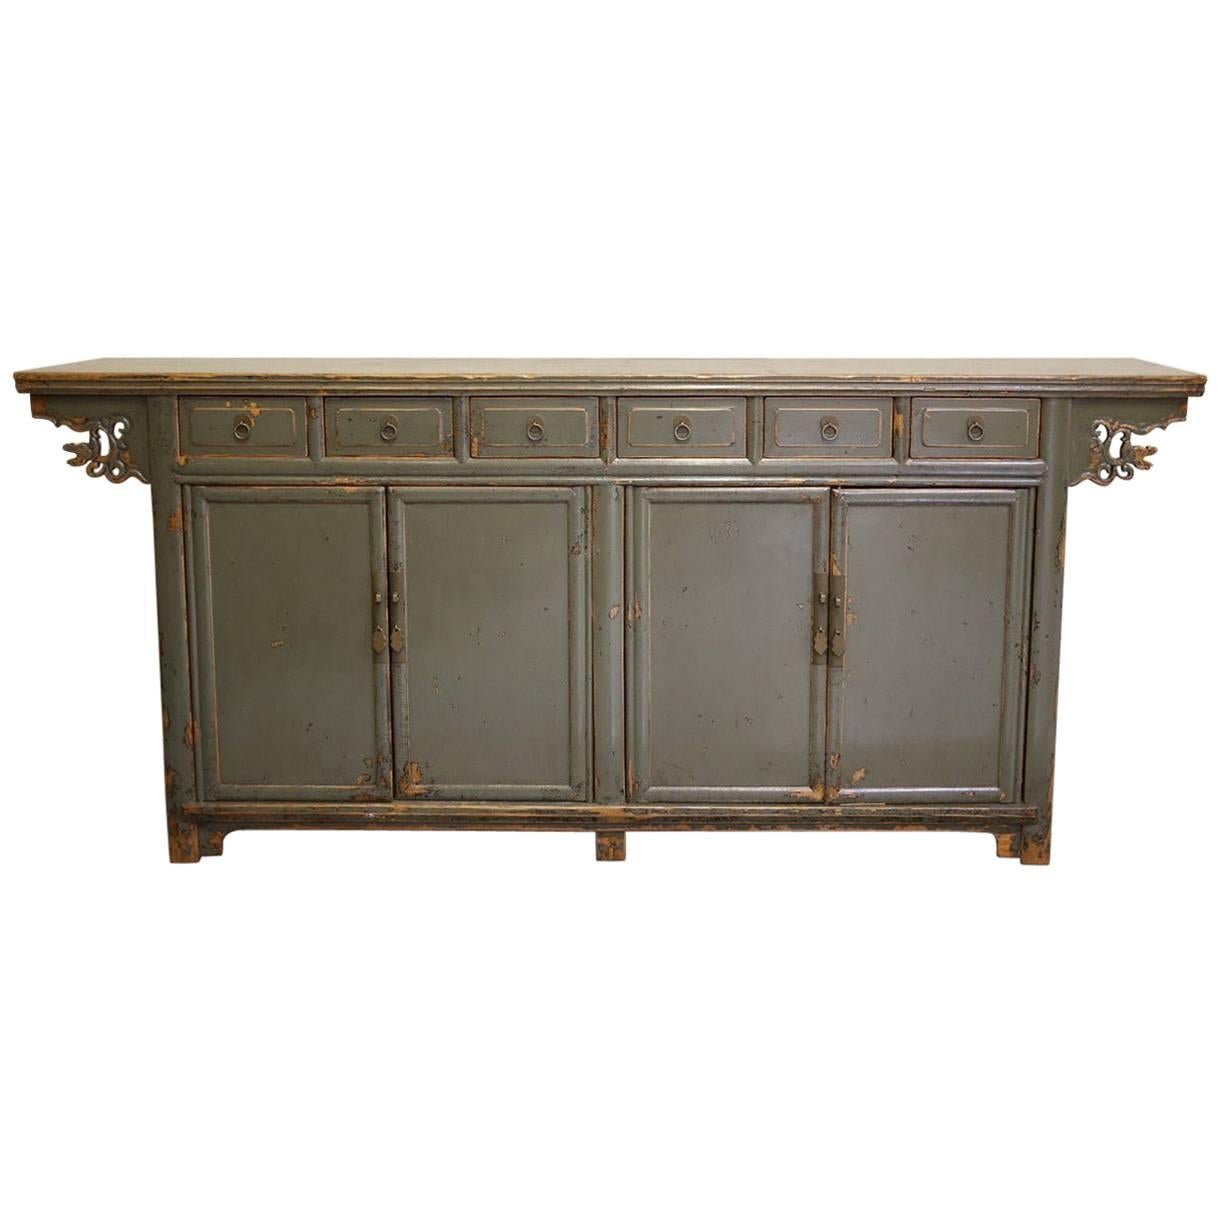 Chinese Sideboard, Painted Green Lacquer, Mahogany Drawers, 19th Century For Sale